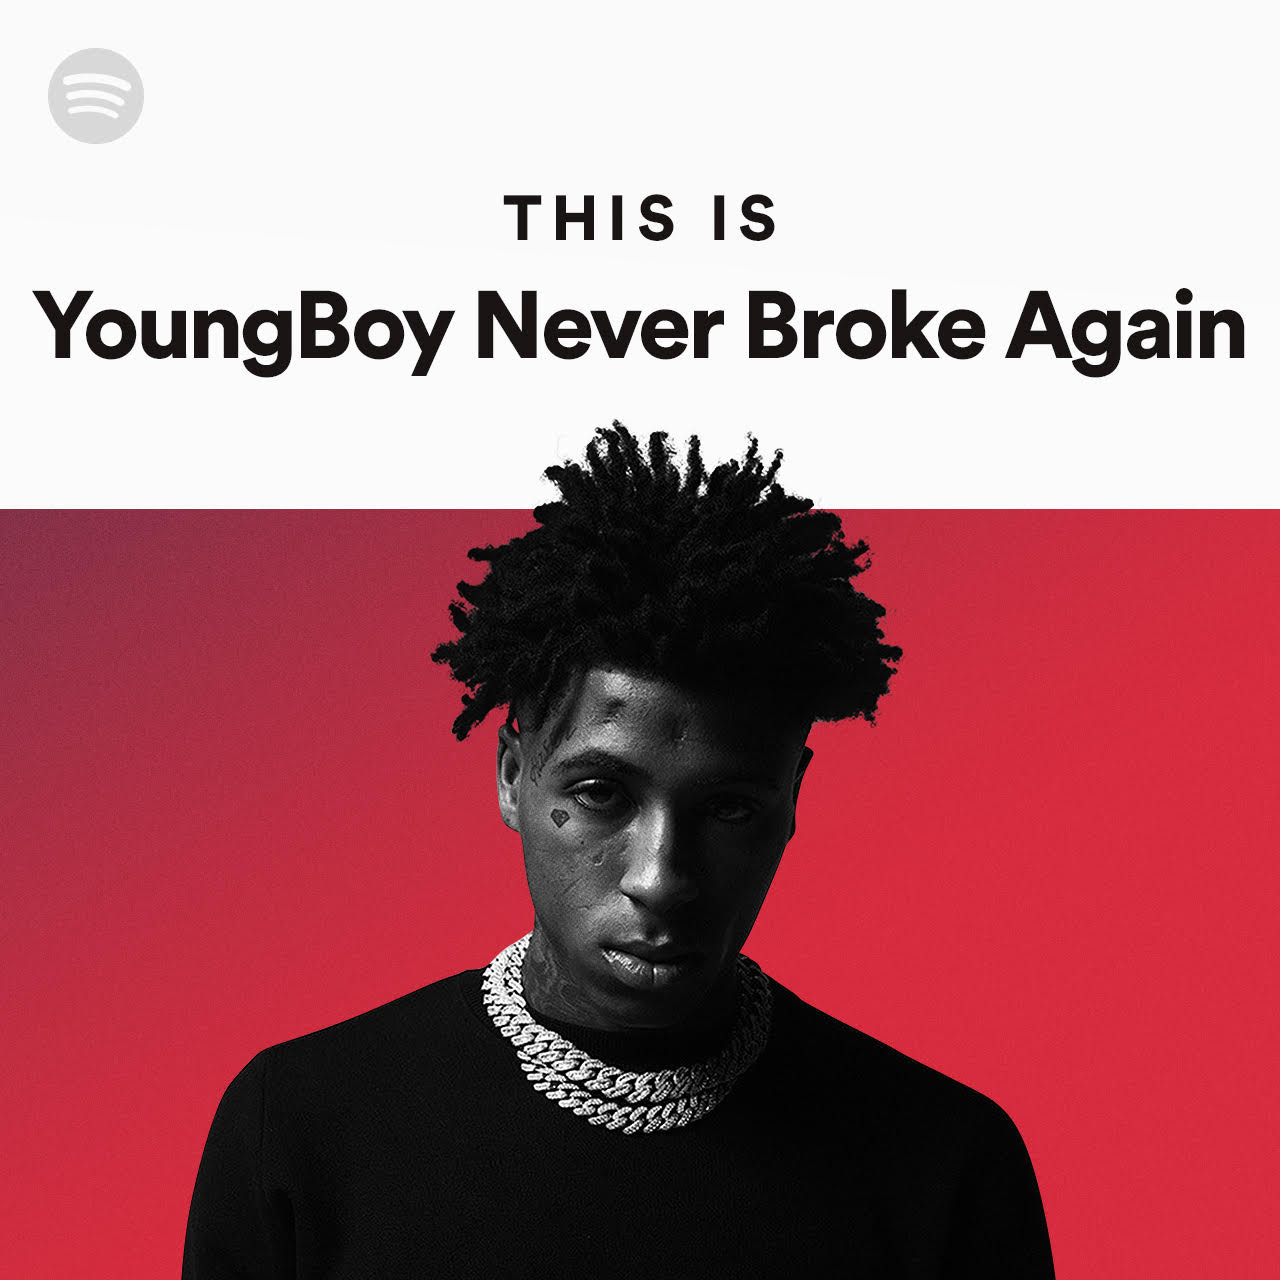 This Is YoungBoy Never Broke Again - playlist by Spotify